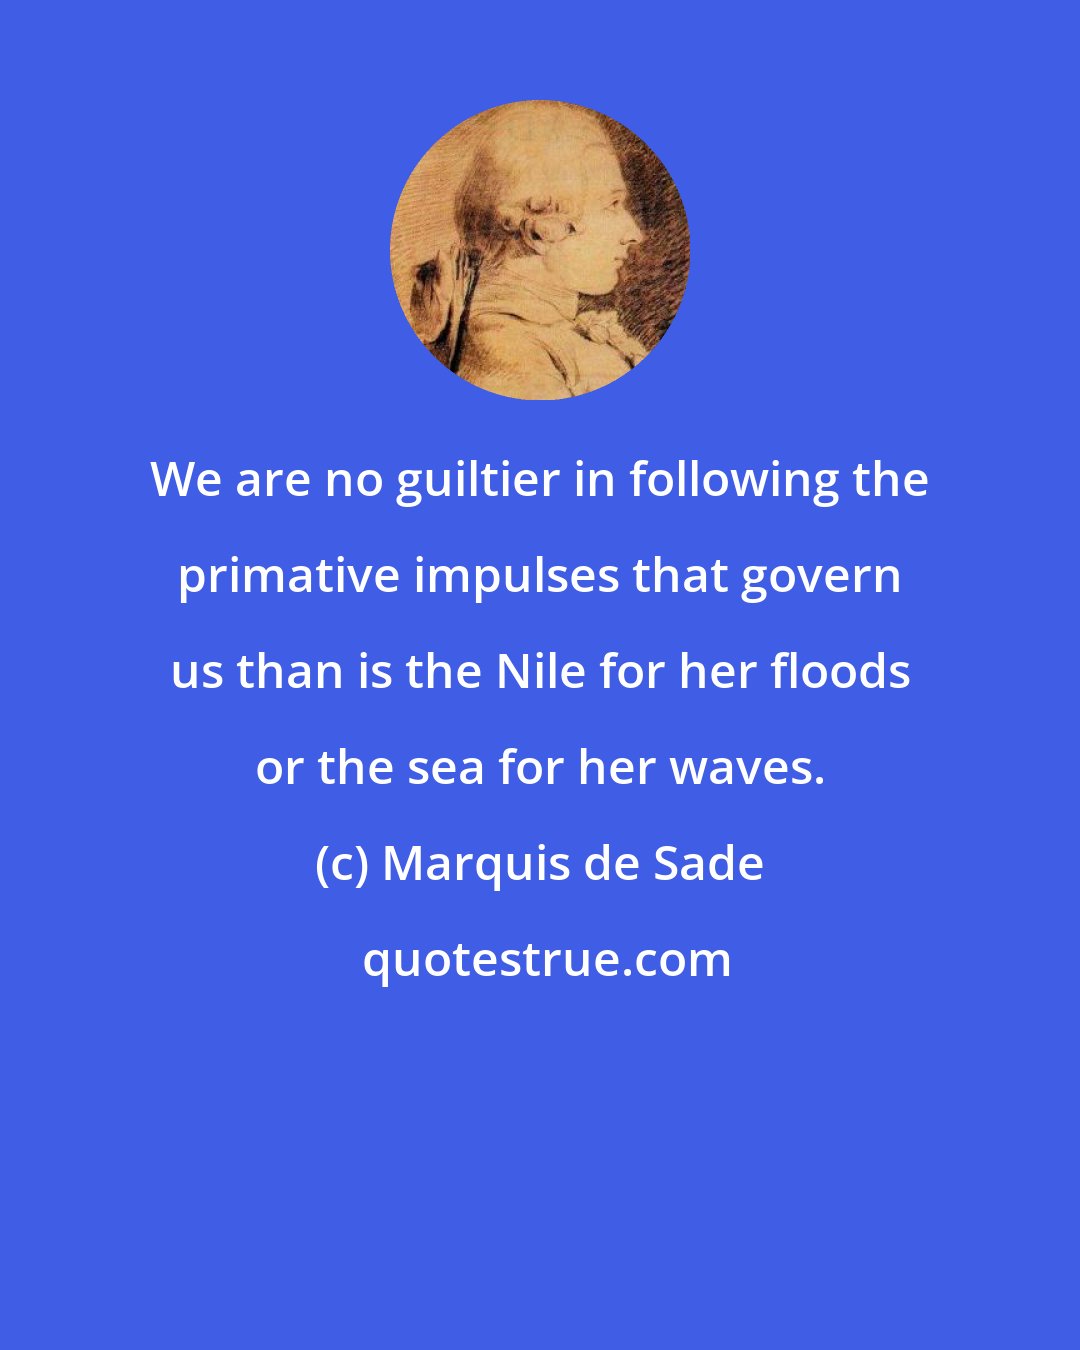 Marquis de Sade: We are no guiltier in following the primative impulses that govern us than is the Nile for her floods or the sea for her waves.